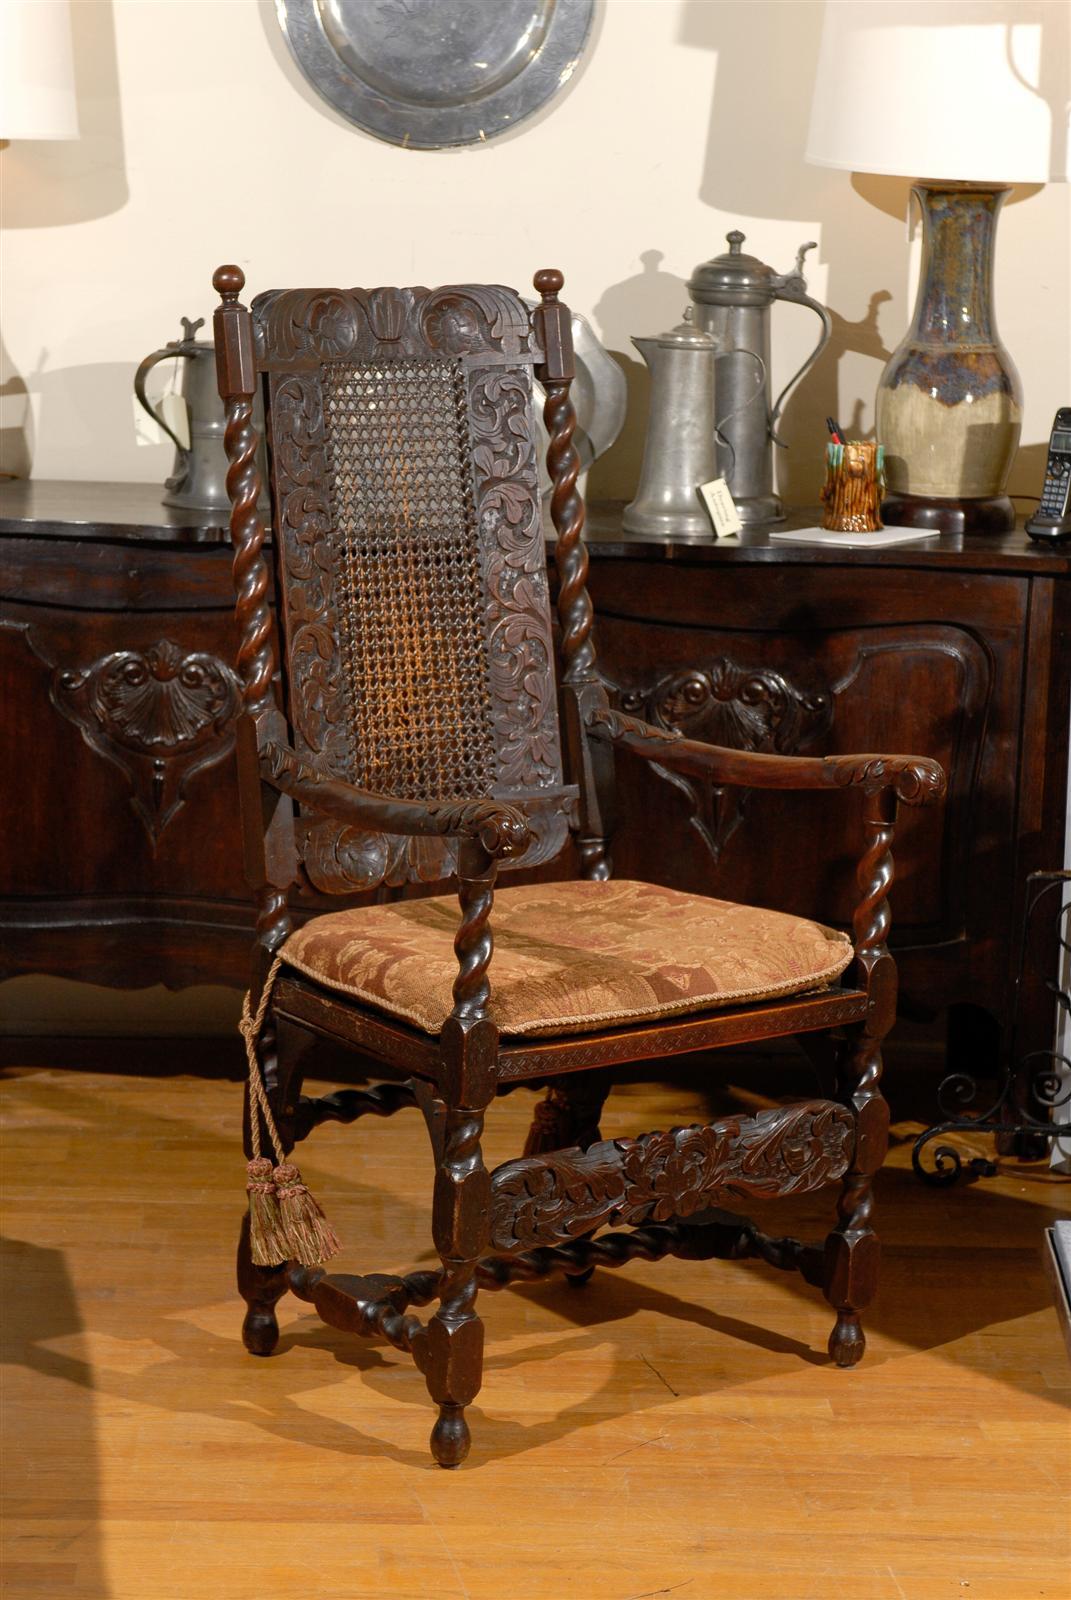 This is a fabulous chair from that period of time.  They didn't make a lot a chairs that have survived since that period of time.  This is a timeless piece of furniture.  It would be fantastic in any home.